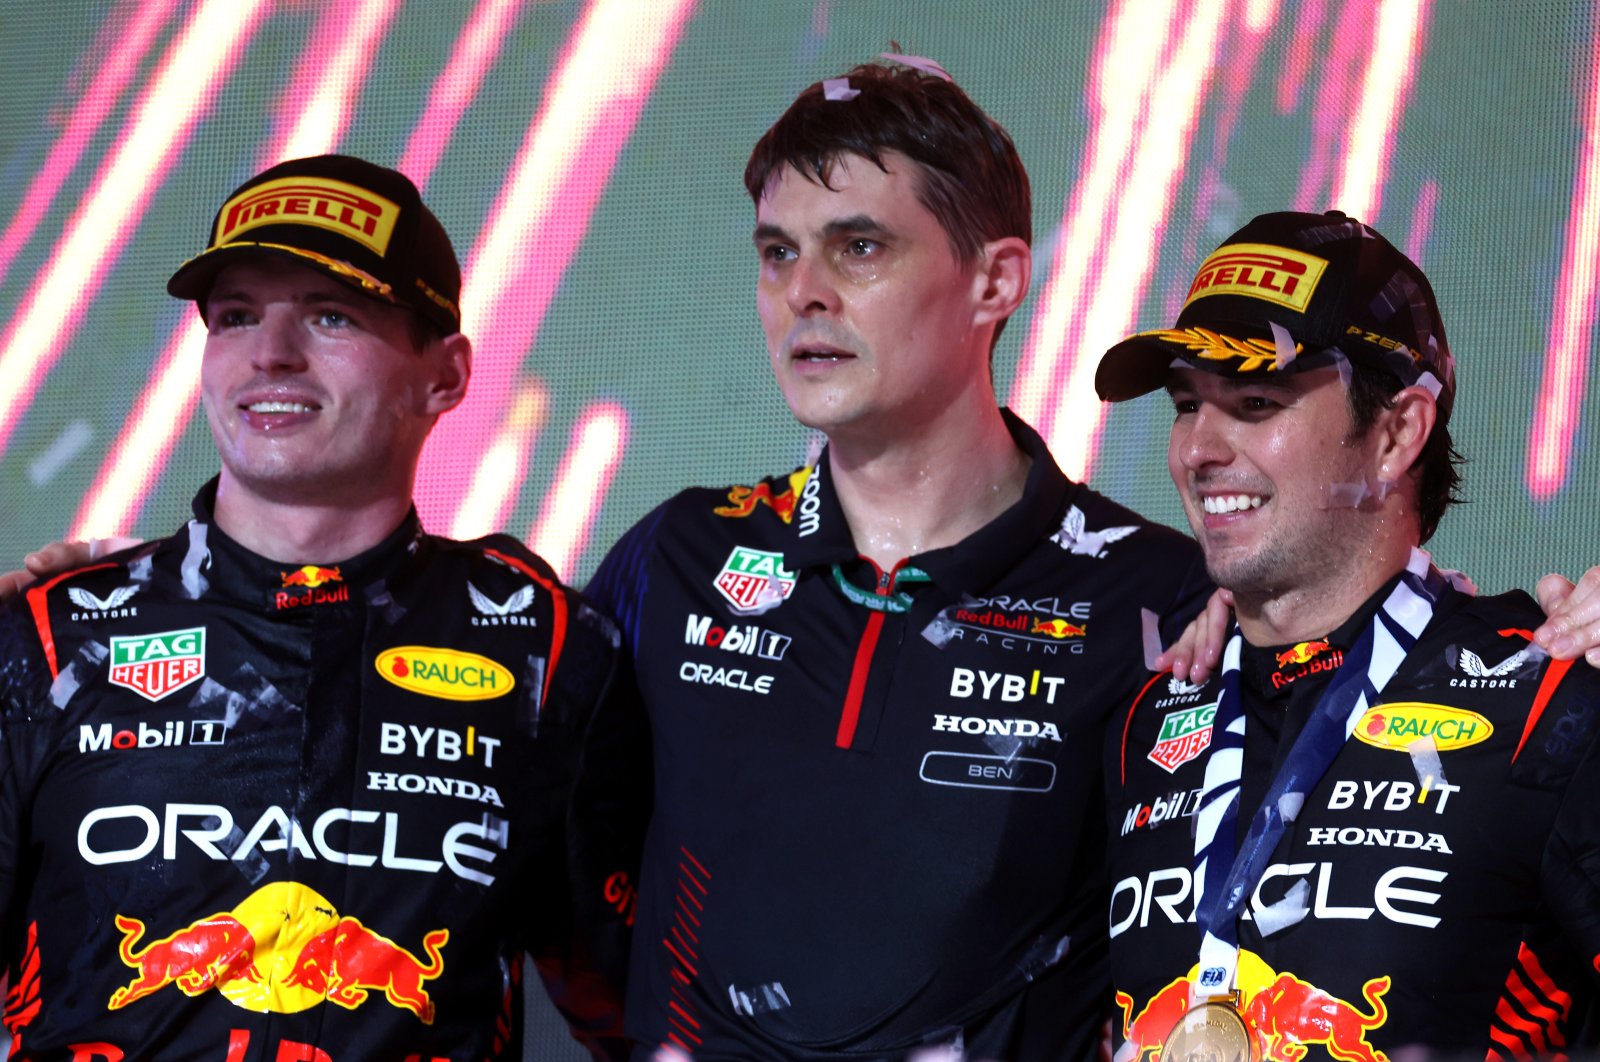 Oracle Red Bull Racing drivers Sergio Perez (R), Max Verstappen (L) and Head of Performance Engineering, Ben Waterhouse celebrate on the podium during the F1 Grand Prix of Saudi Arabia at Jeddah Corniche Circuit, Jeddah, Saudi Arabia, March 19, 2023. (Getty Images Photo)